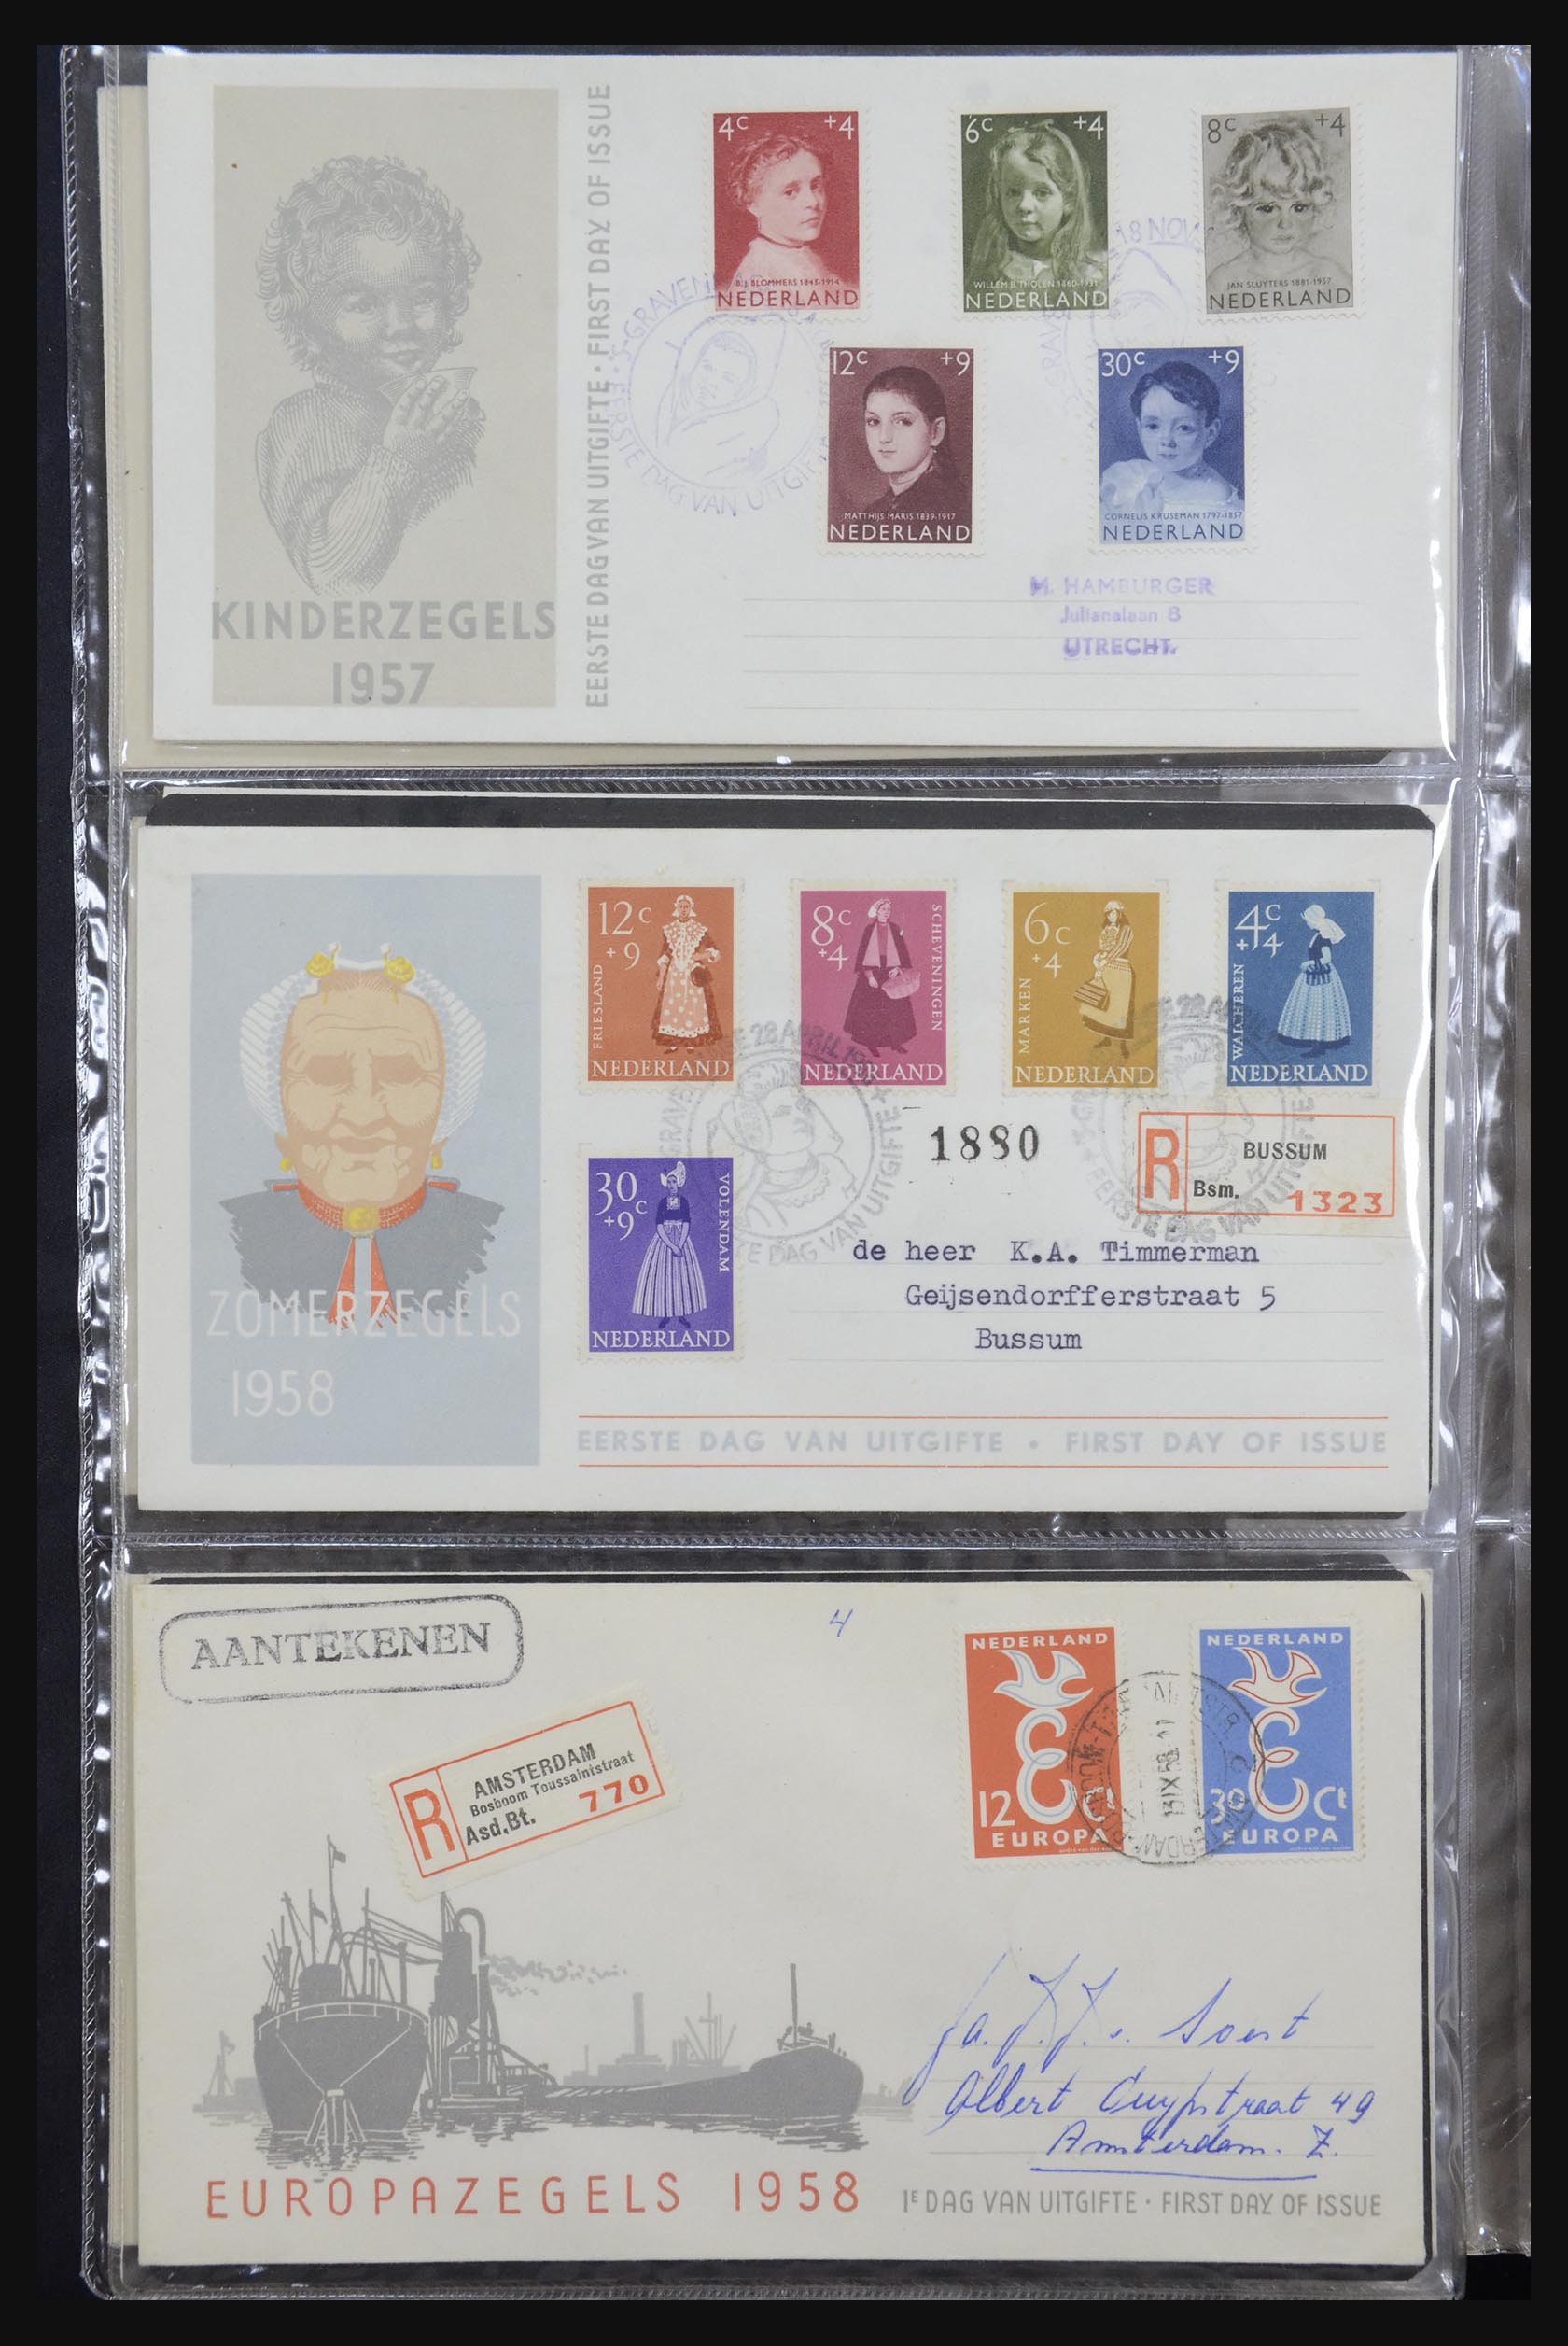 32147 004 - 32147 Netherlands FDC's 1956-2016!